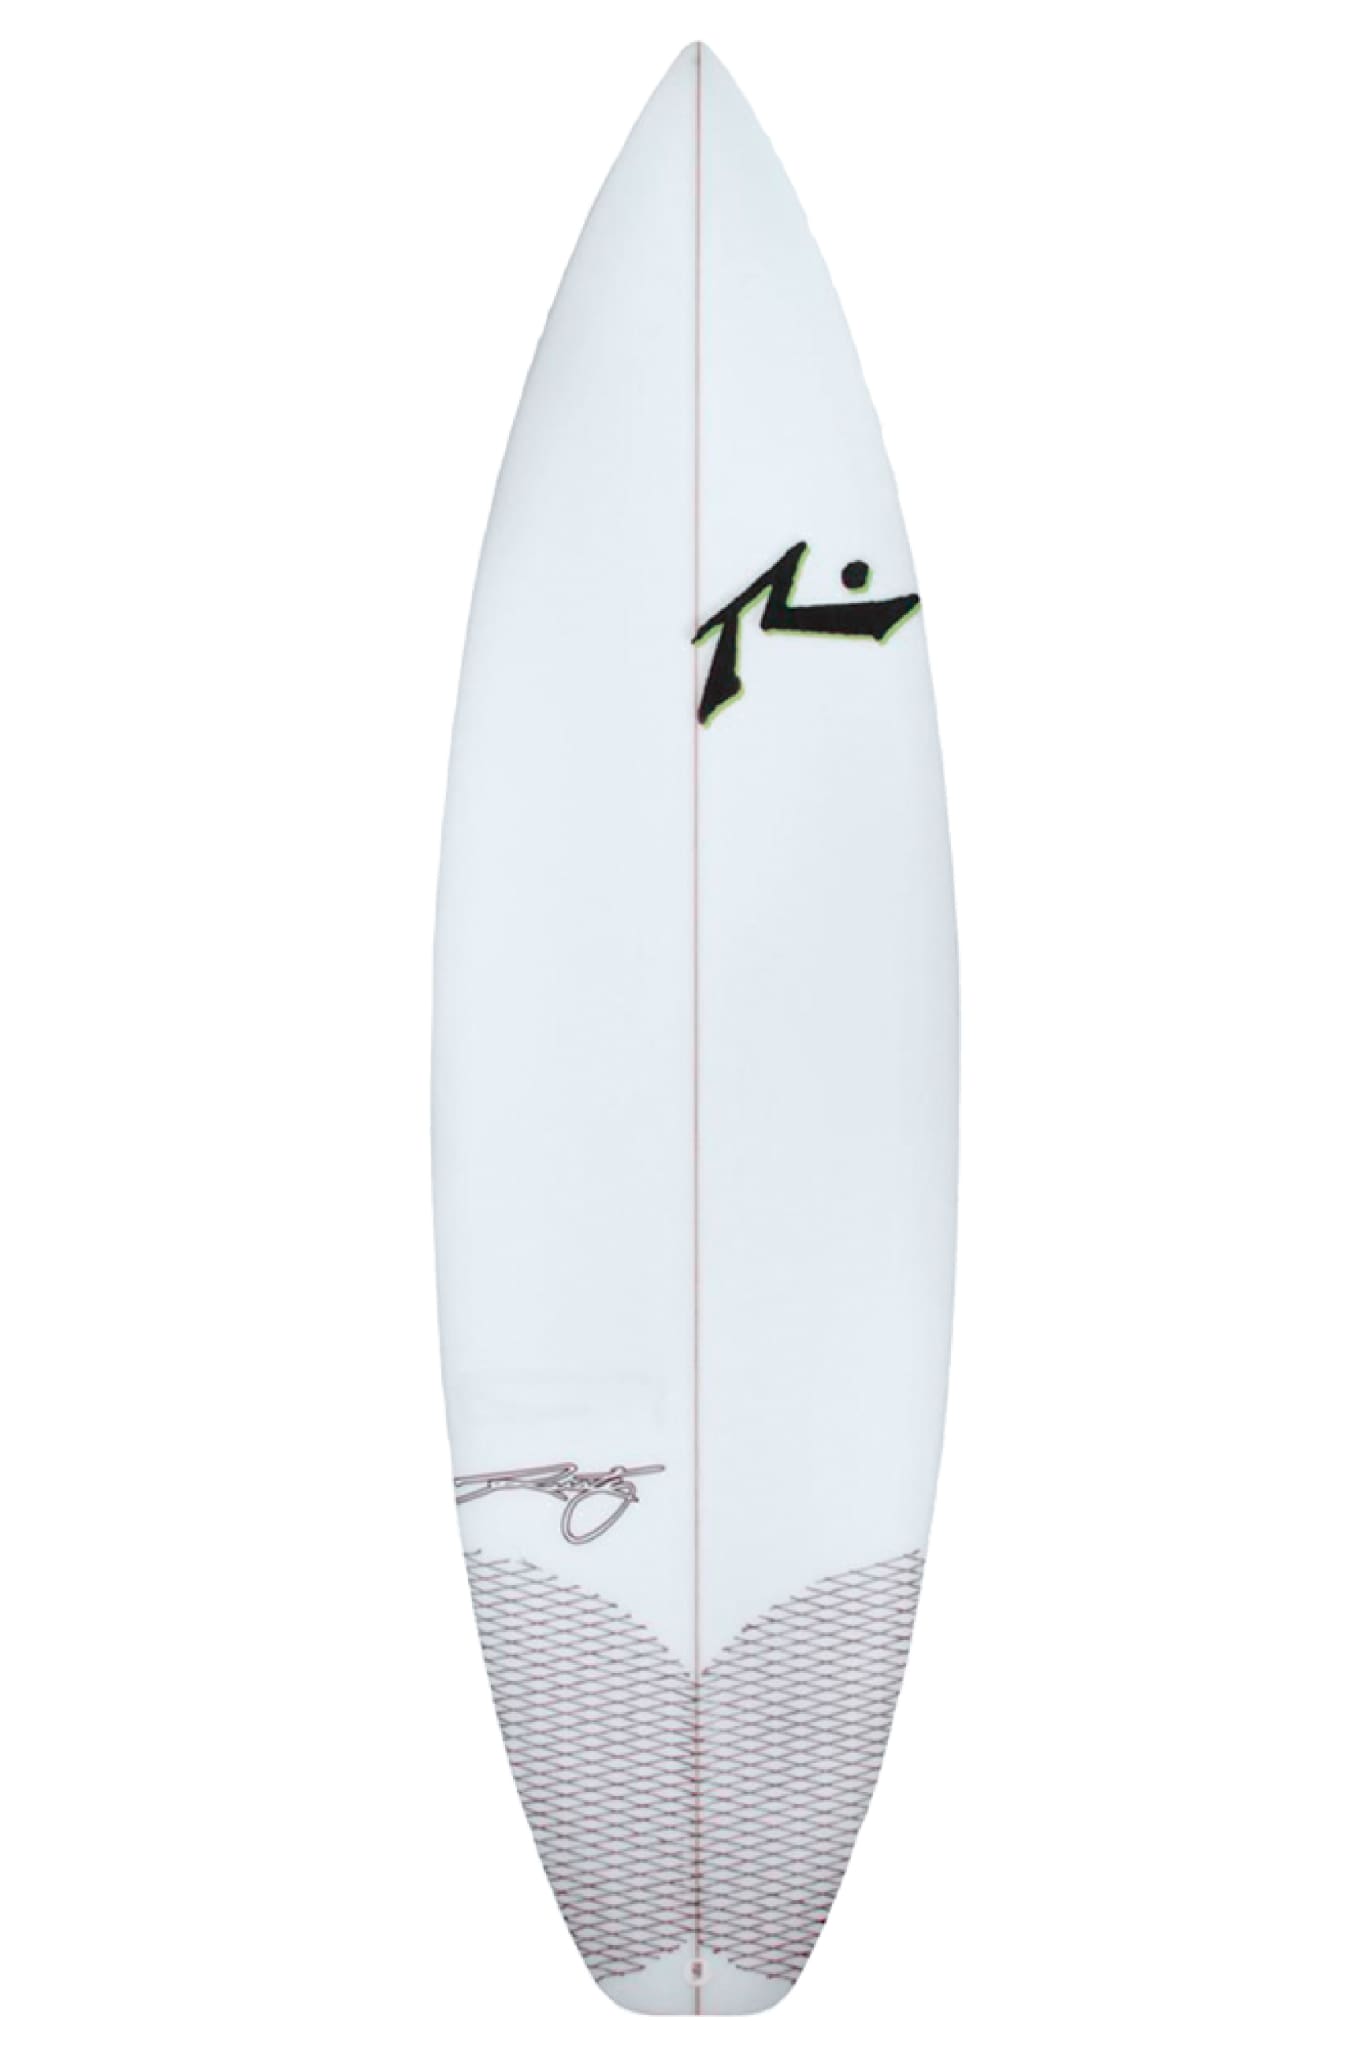 Yard Dog | Surfboards-Rusty Surfboards South Africa